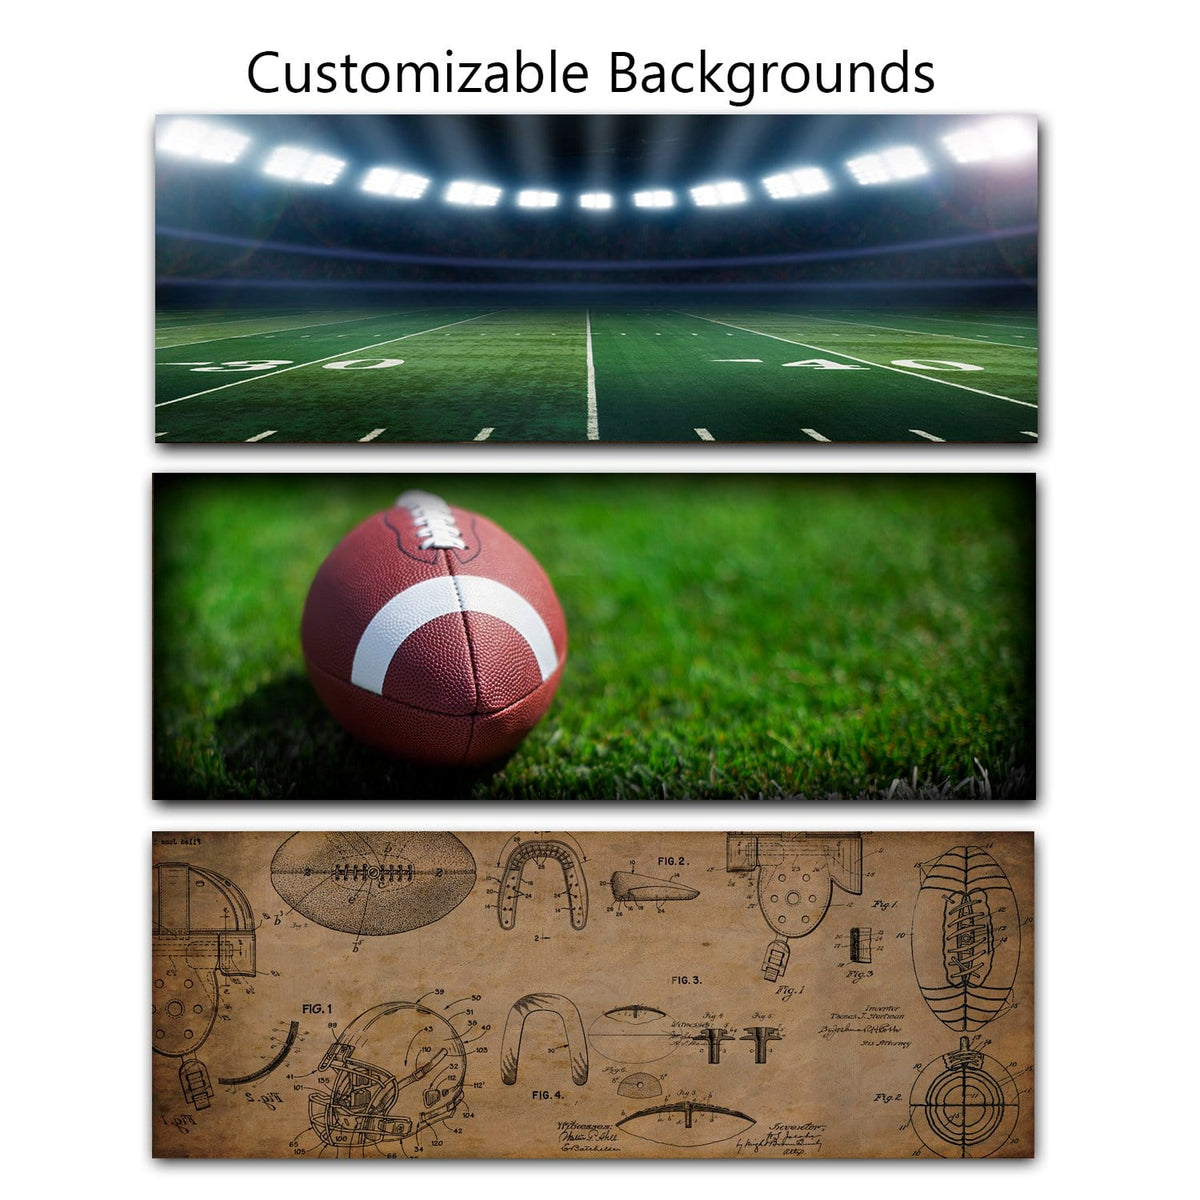 Select from several great football background designs to create your perfect gift